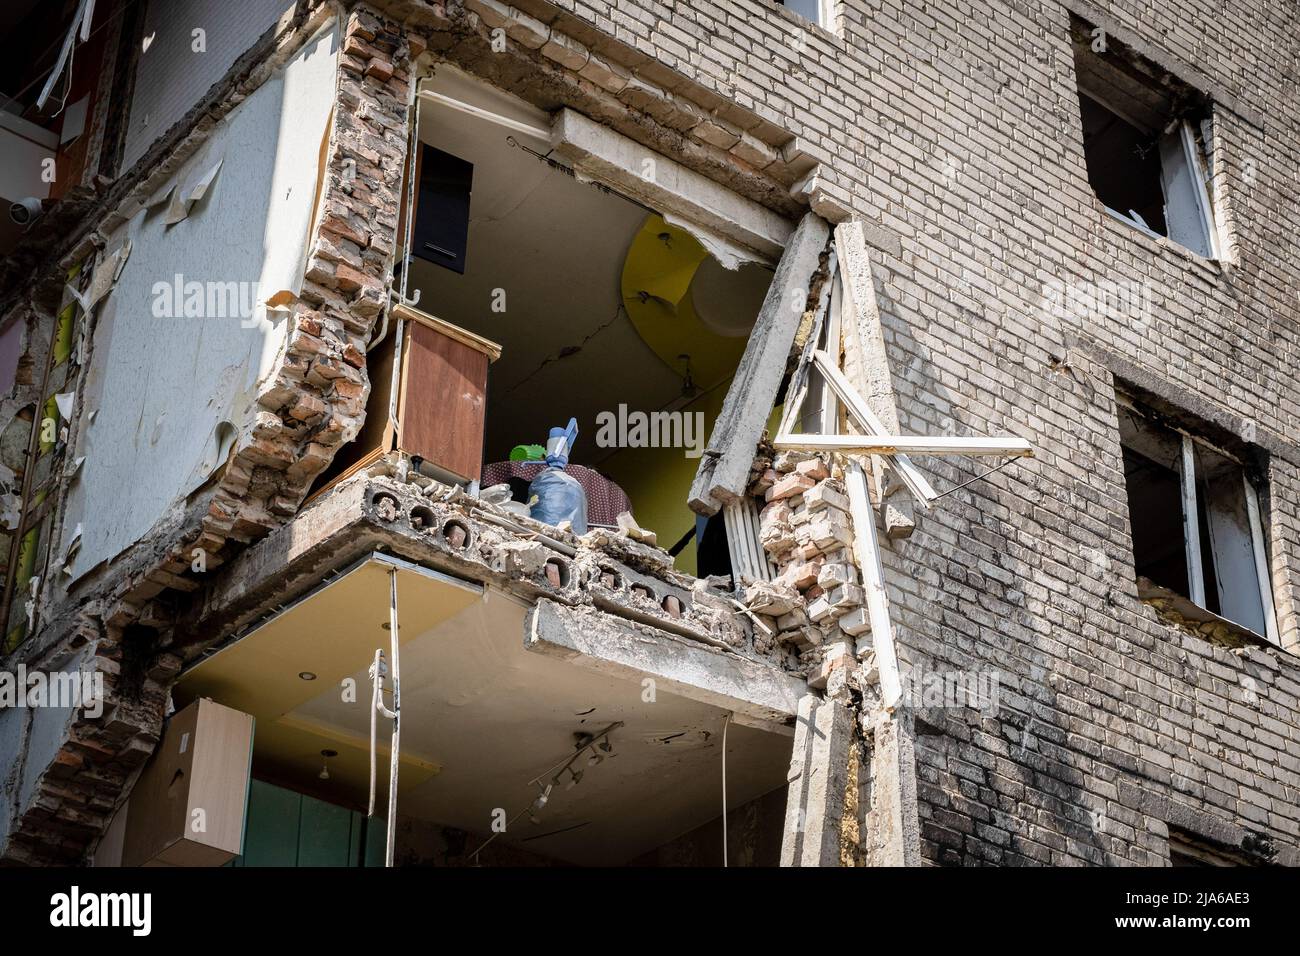 Bakhmut, Dontesk Oblast, Ukraine. 24th May, 2022. A living room and a dining table can be seen in the ruins of the residential building destroyed by Russian artillery strikes in Bakhmut, Donbas. As Bakhmut stands as a key city to Ukrainian forces in defending Donetsk(Donbas) region, the city is under attack by the Russian troops. The Russian invasion of Ukraine started on February 24, the war that has killed numerous civilians and soldiers. (Credit Image: © Alex Chan Tsz Yuk/SOPA Images via ZUMA Press Wire) Stock Photo